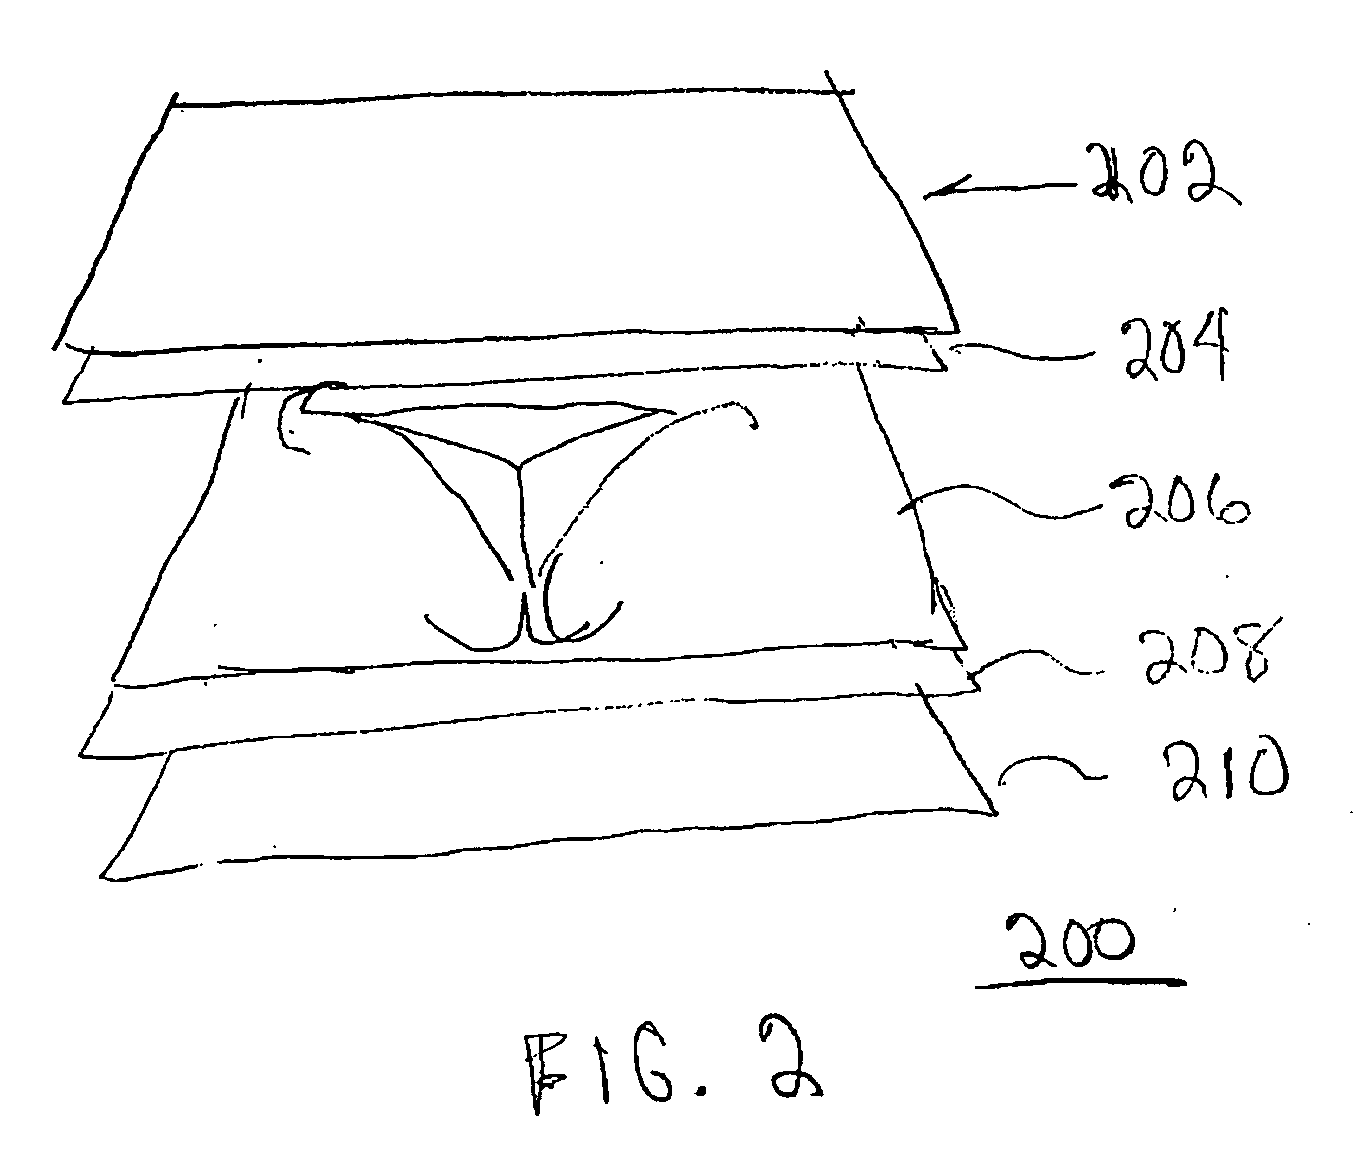 Method and system for creating receipt on paper with embedded RFID tags therein